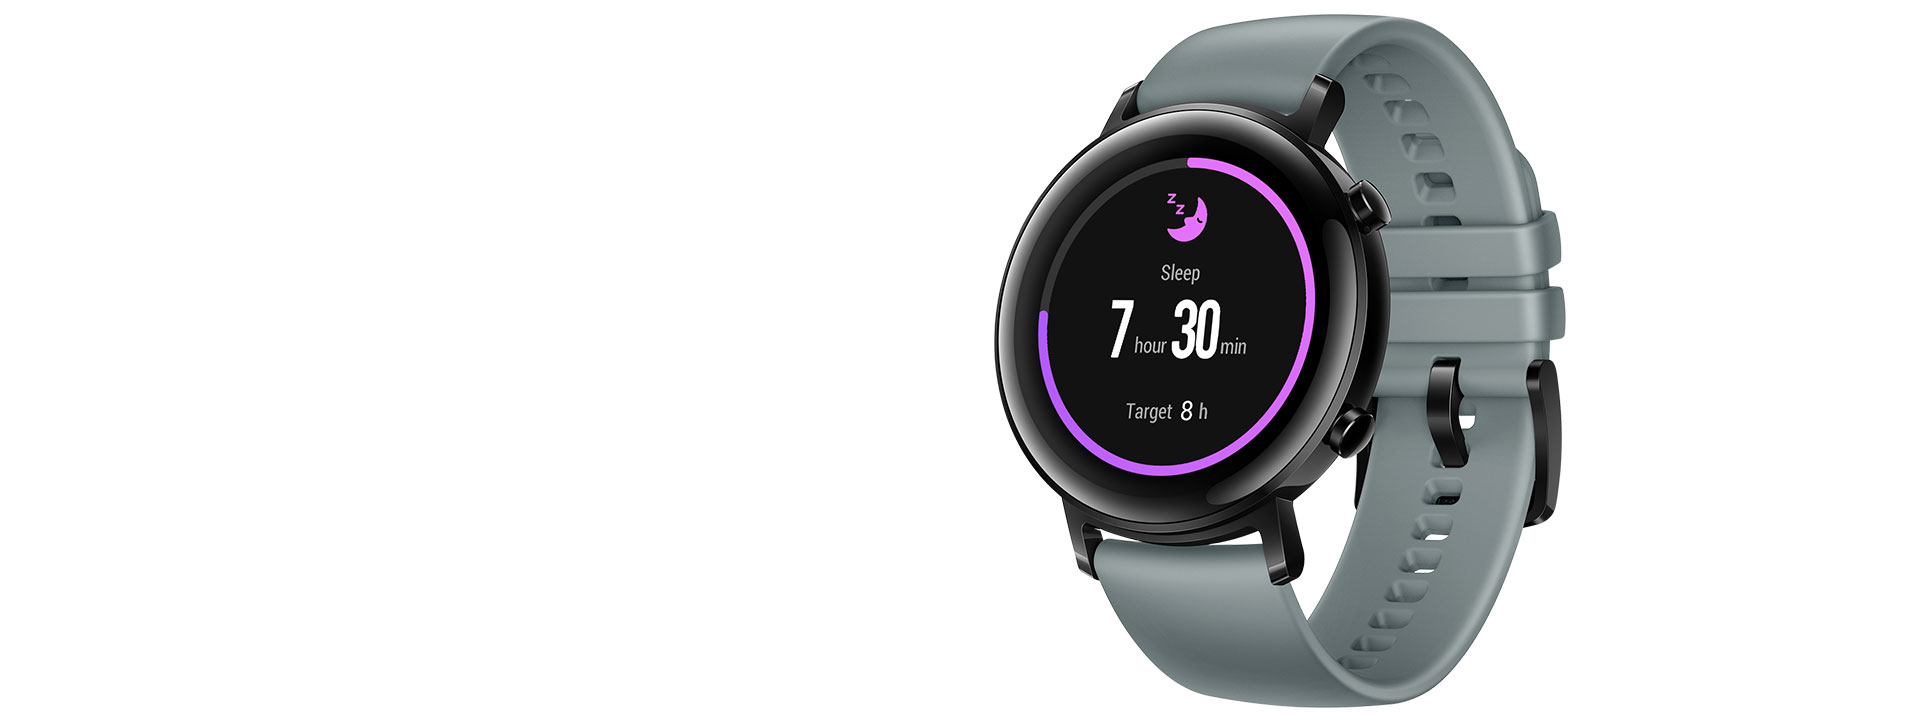 HUAWEI WATCH GT2 Activity Tracking